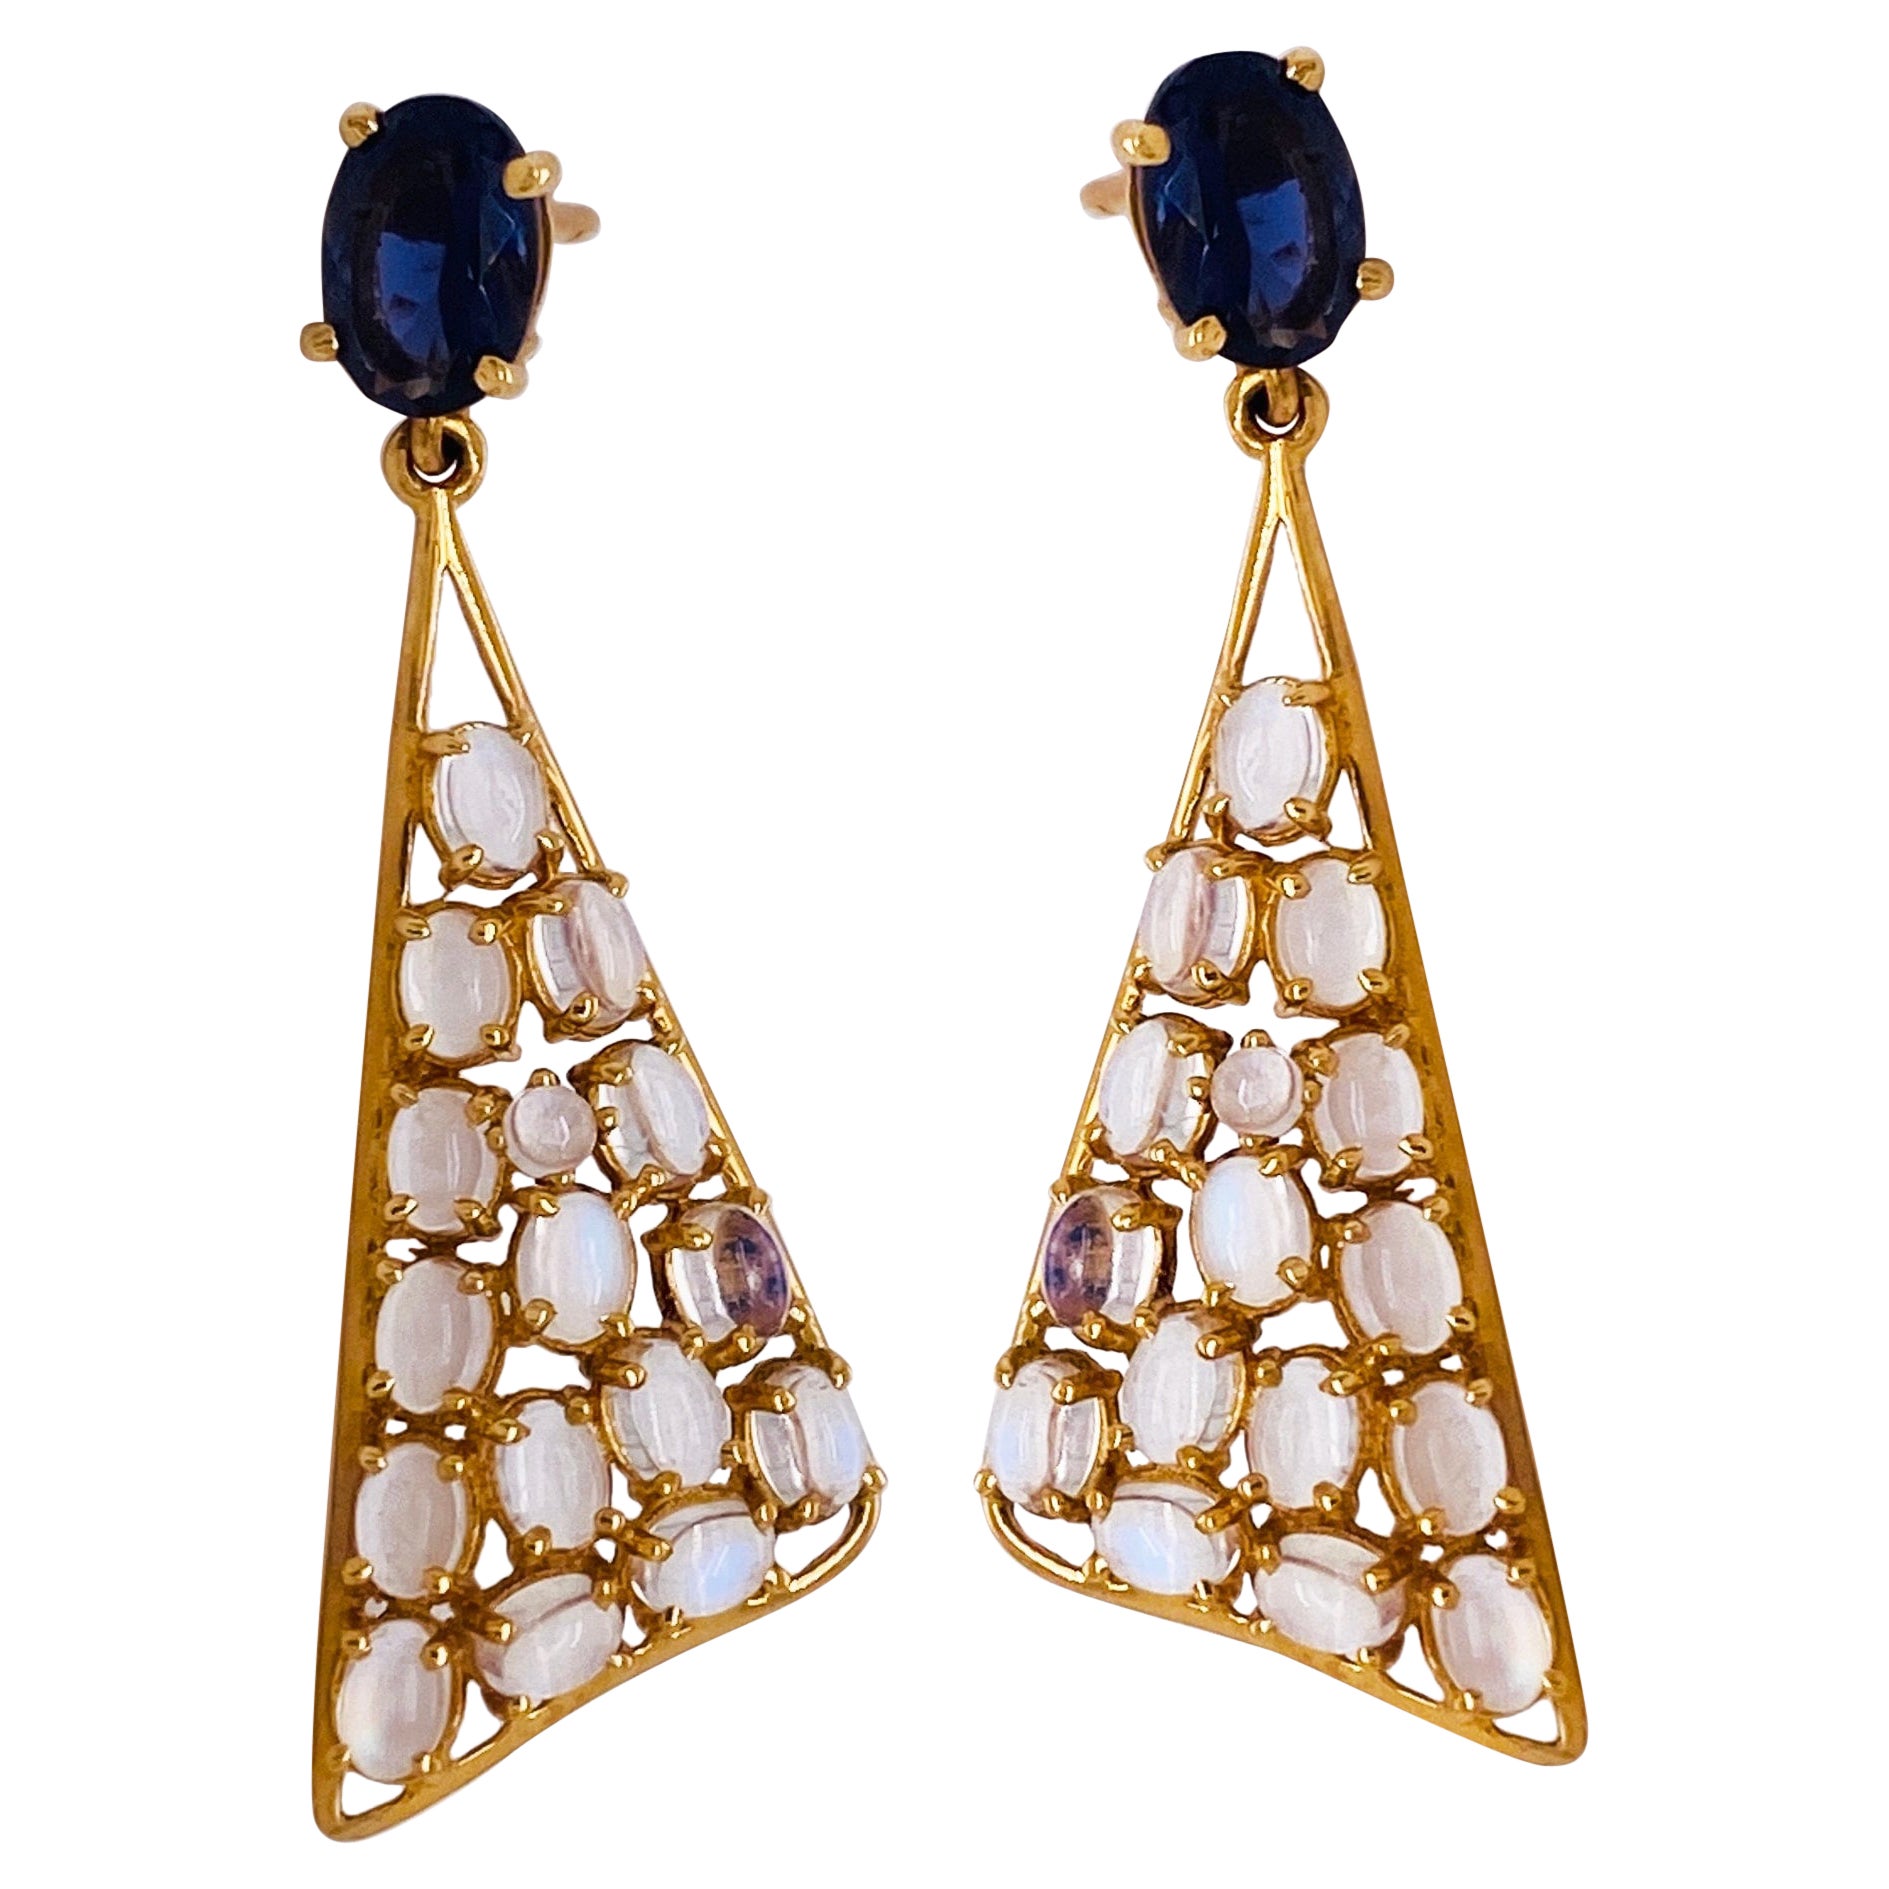 2.55 Carats Sapphires & 2.80 Carats Moonstones, 18K Gold Statement Earrings 'Lv' For Sale